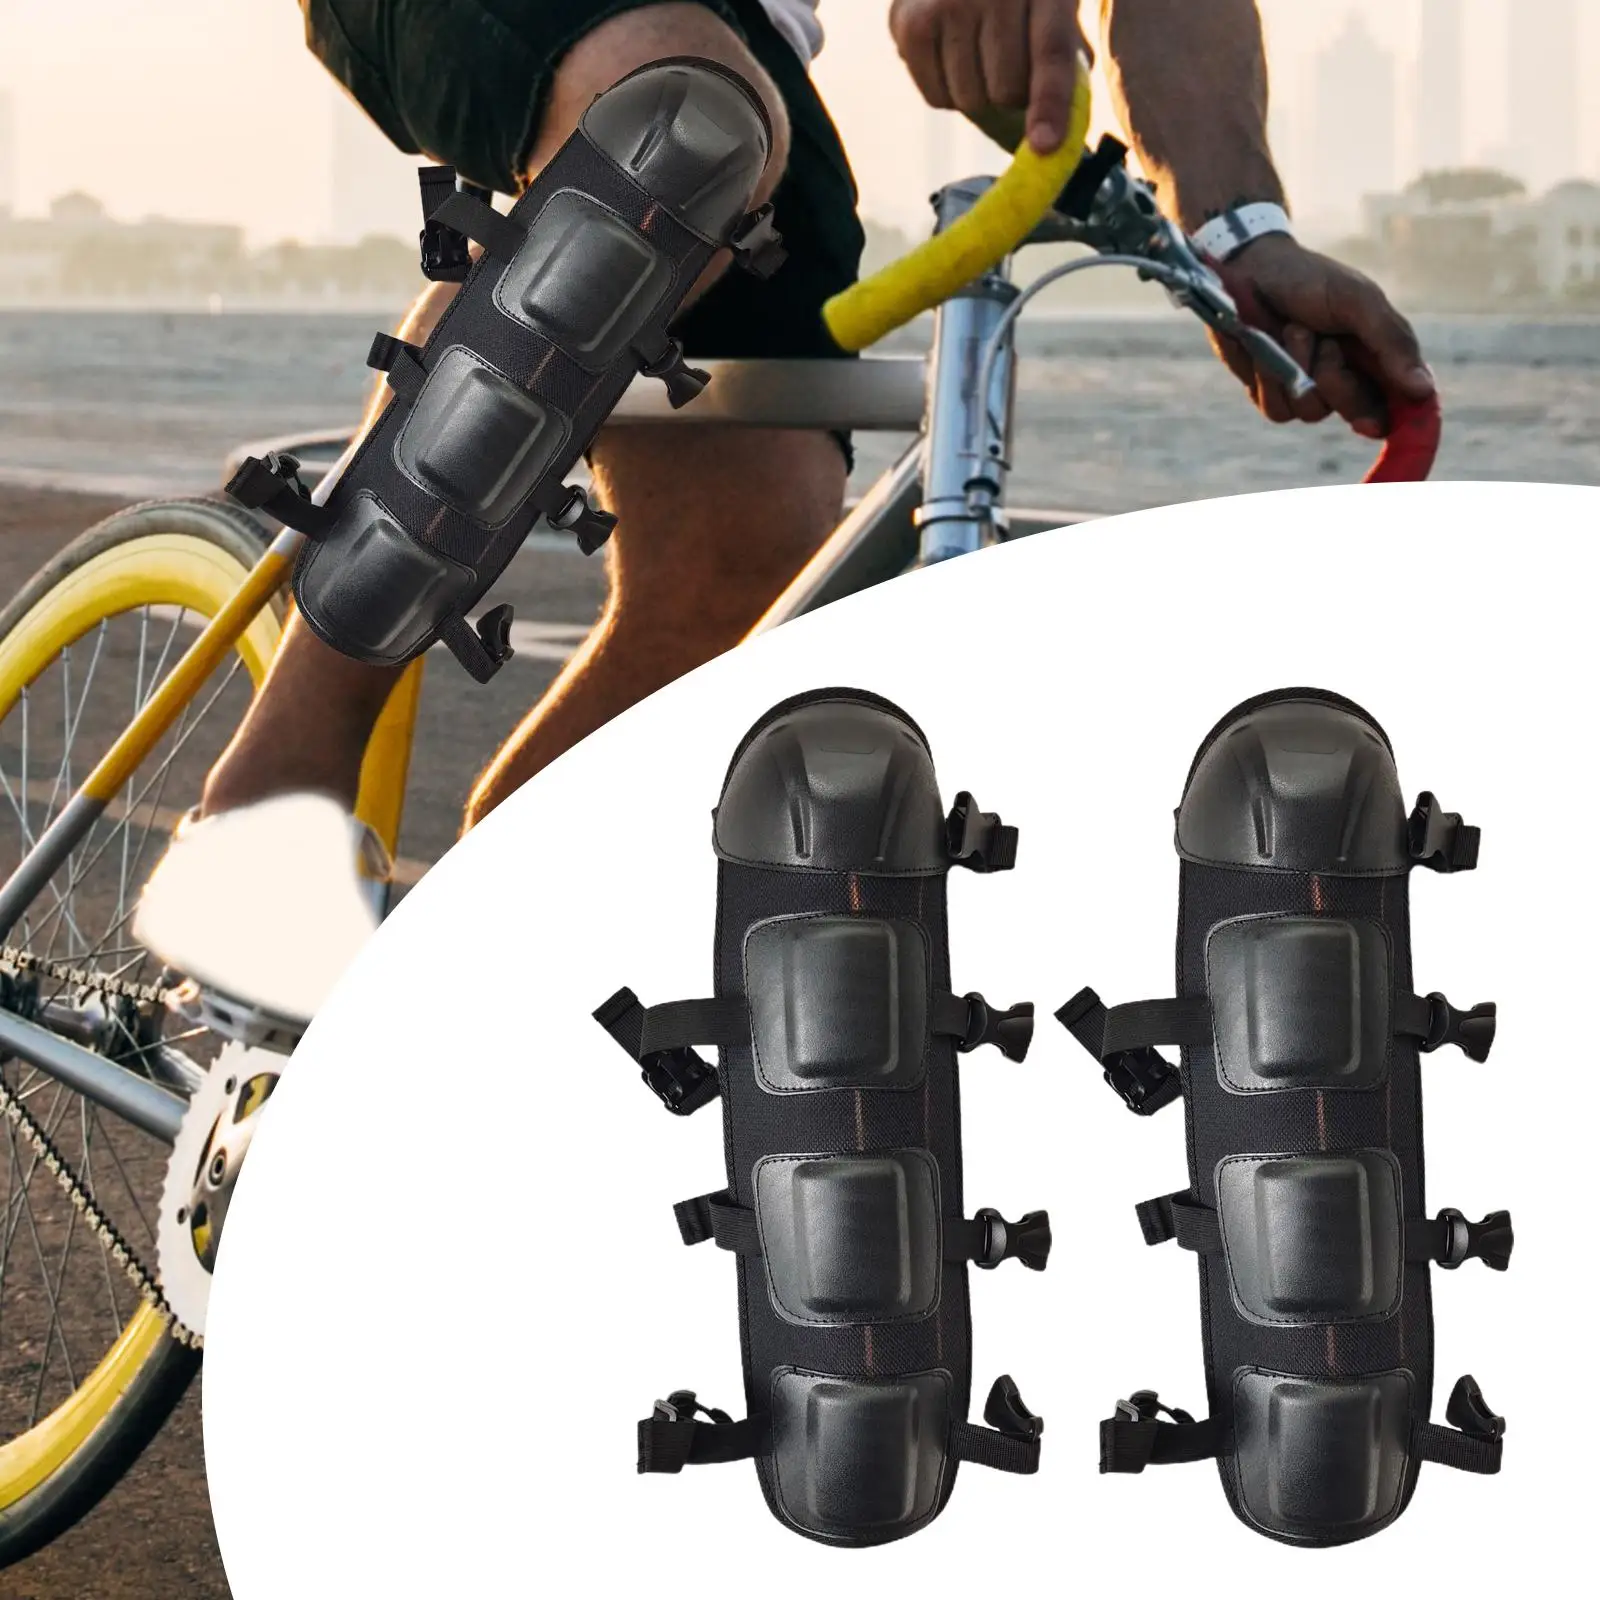 Knee Pads Kneelet Protective Gear Protection Knees Soft Motorcycle Protective for Scooter Mountain Bikes Work Safety Fitments